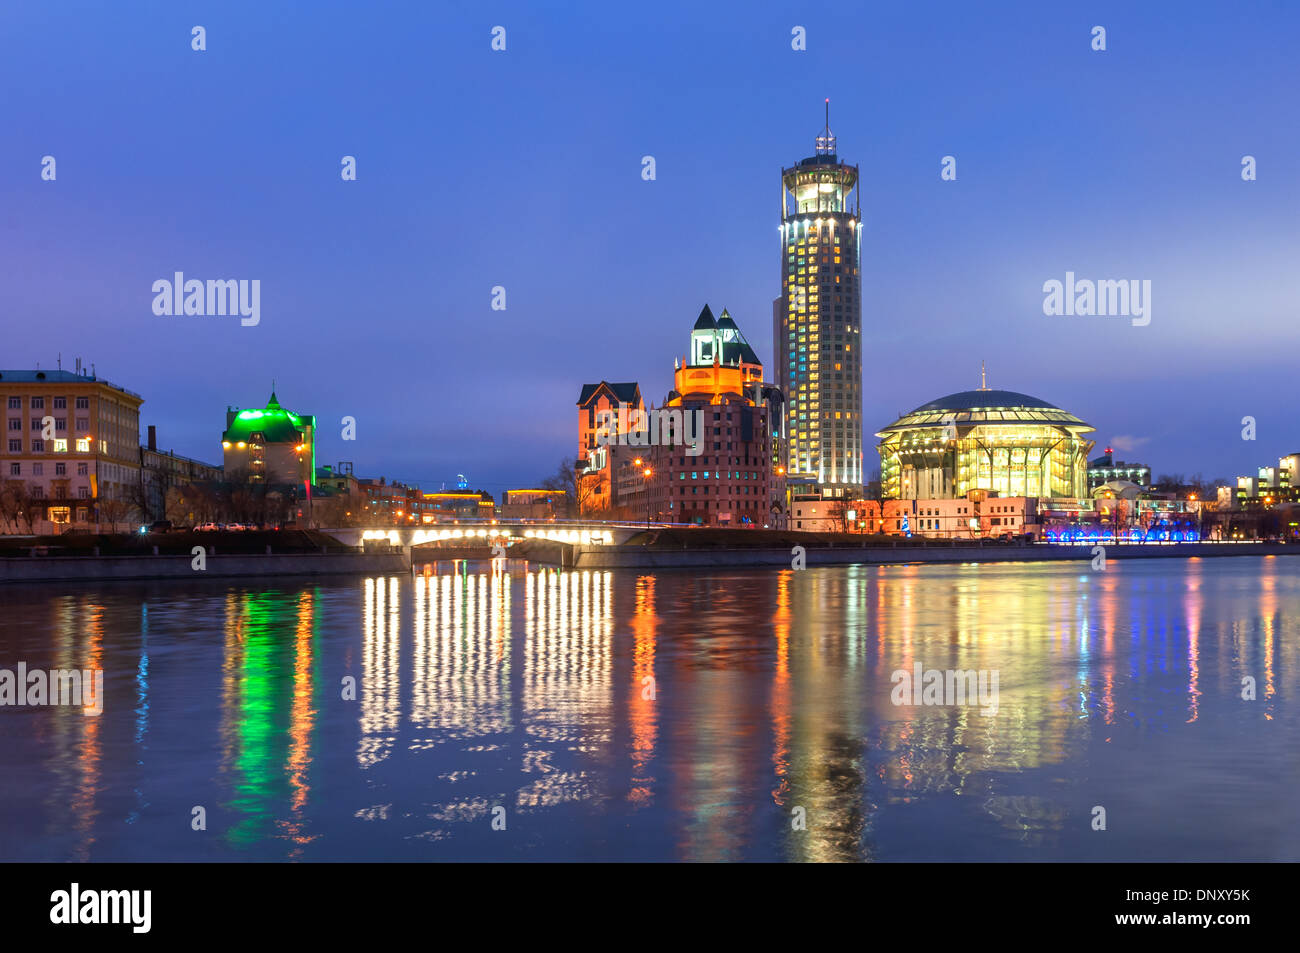 Moscow music house at night Stock Photo